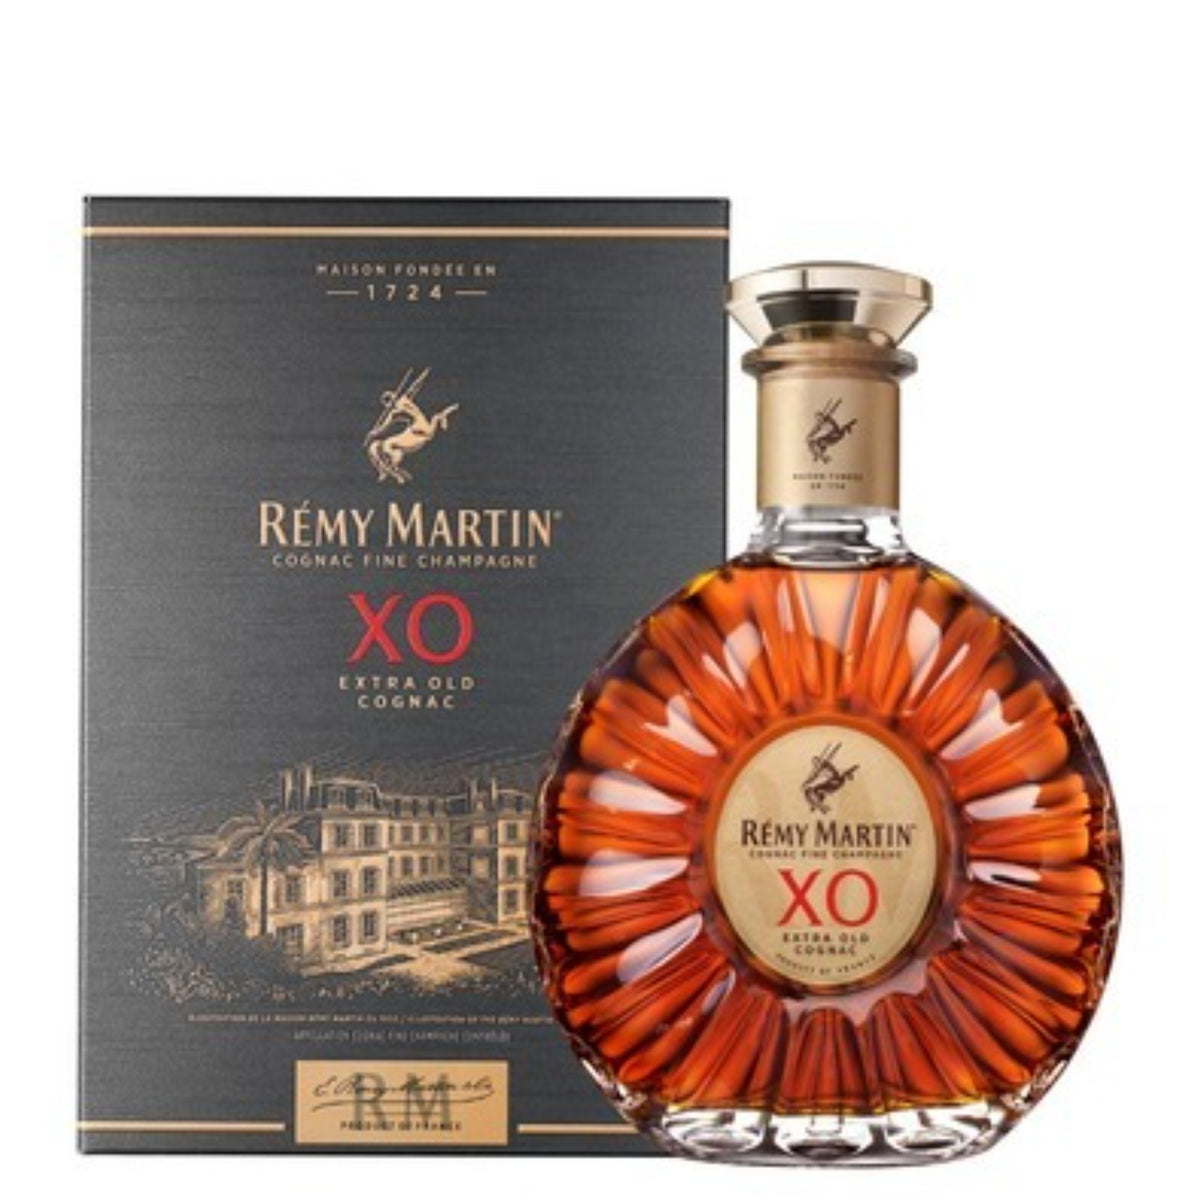 Remy Martin XII 750ml - Haskells